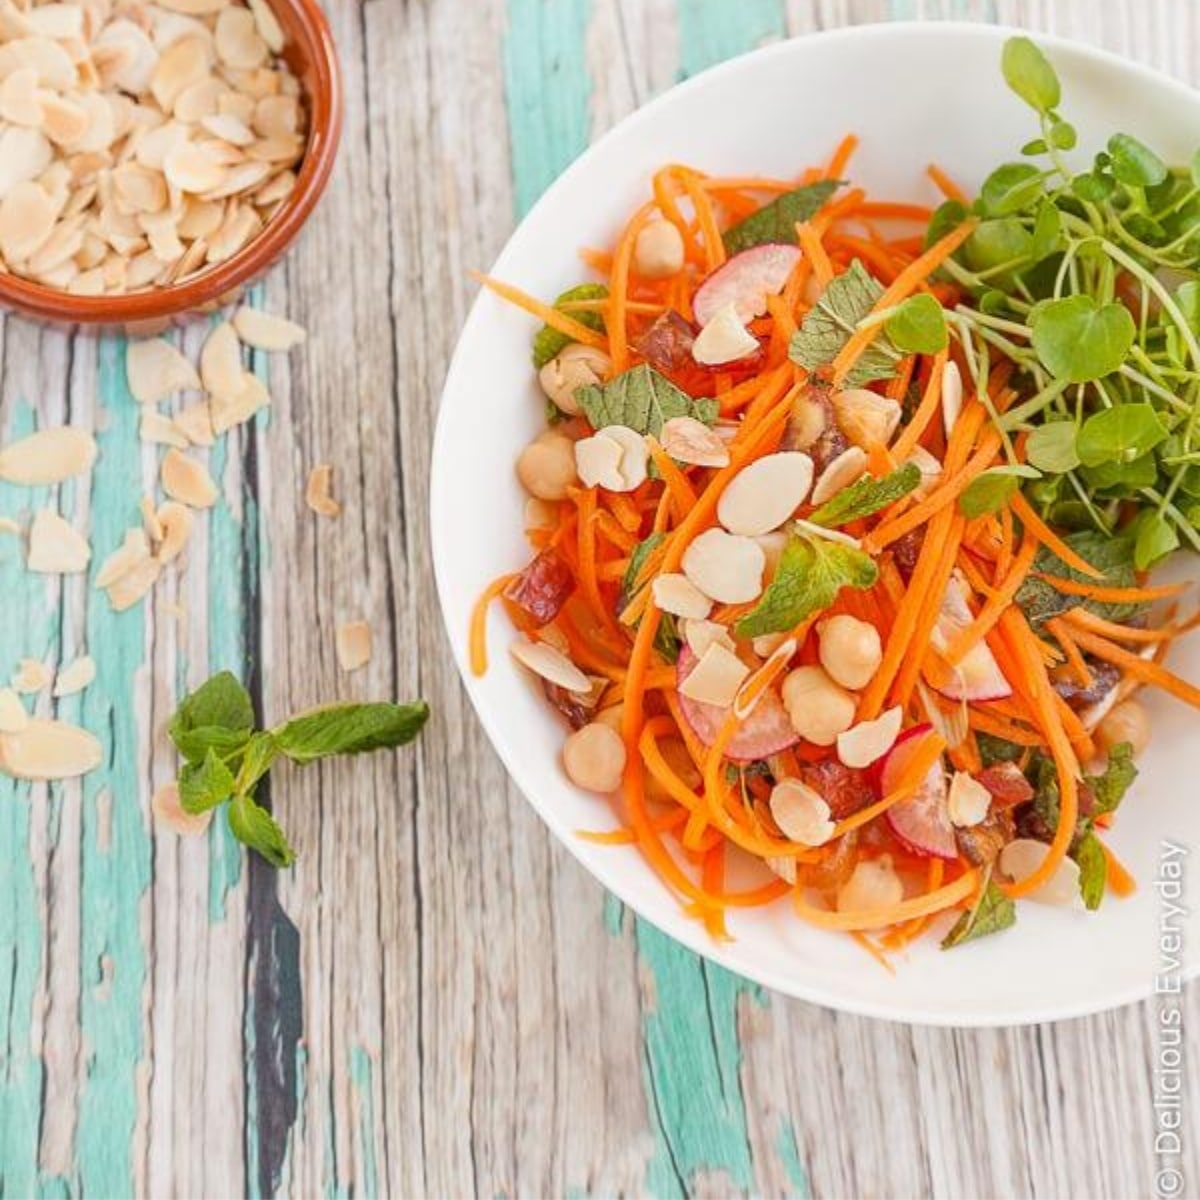 Moroccan Carrot Salad with Chickpeas | Vegan & Vegetarian | Delicious ...